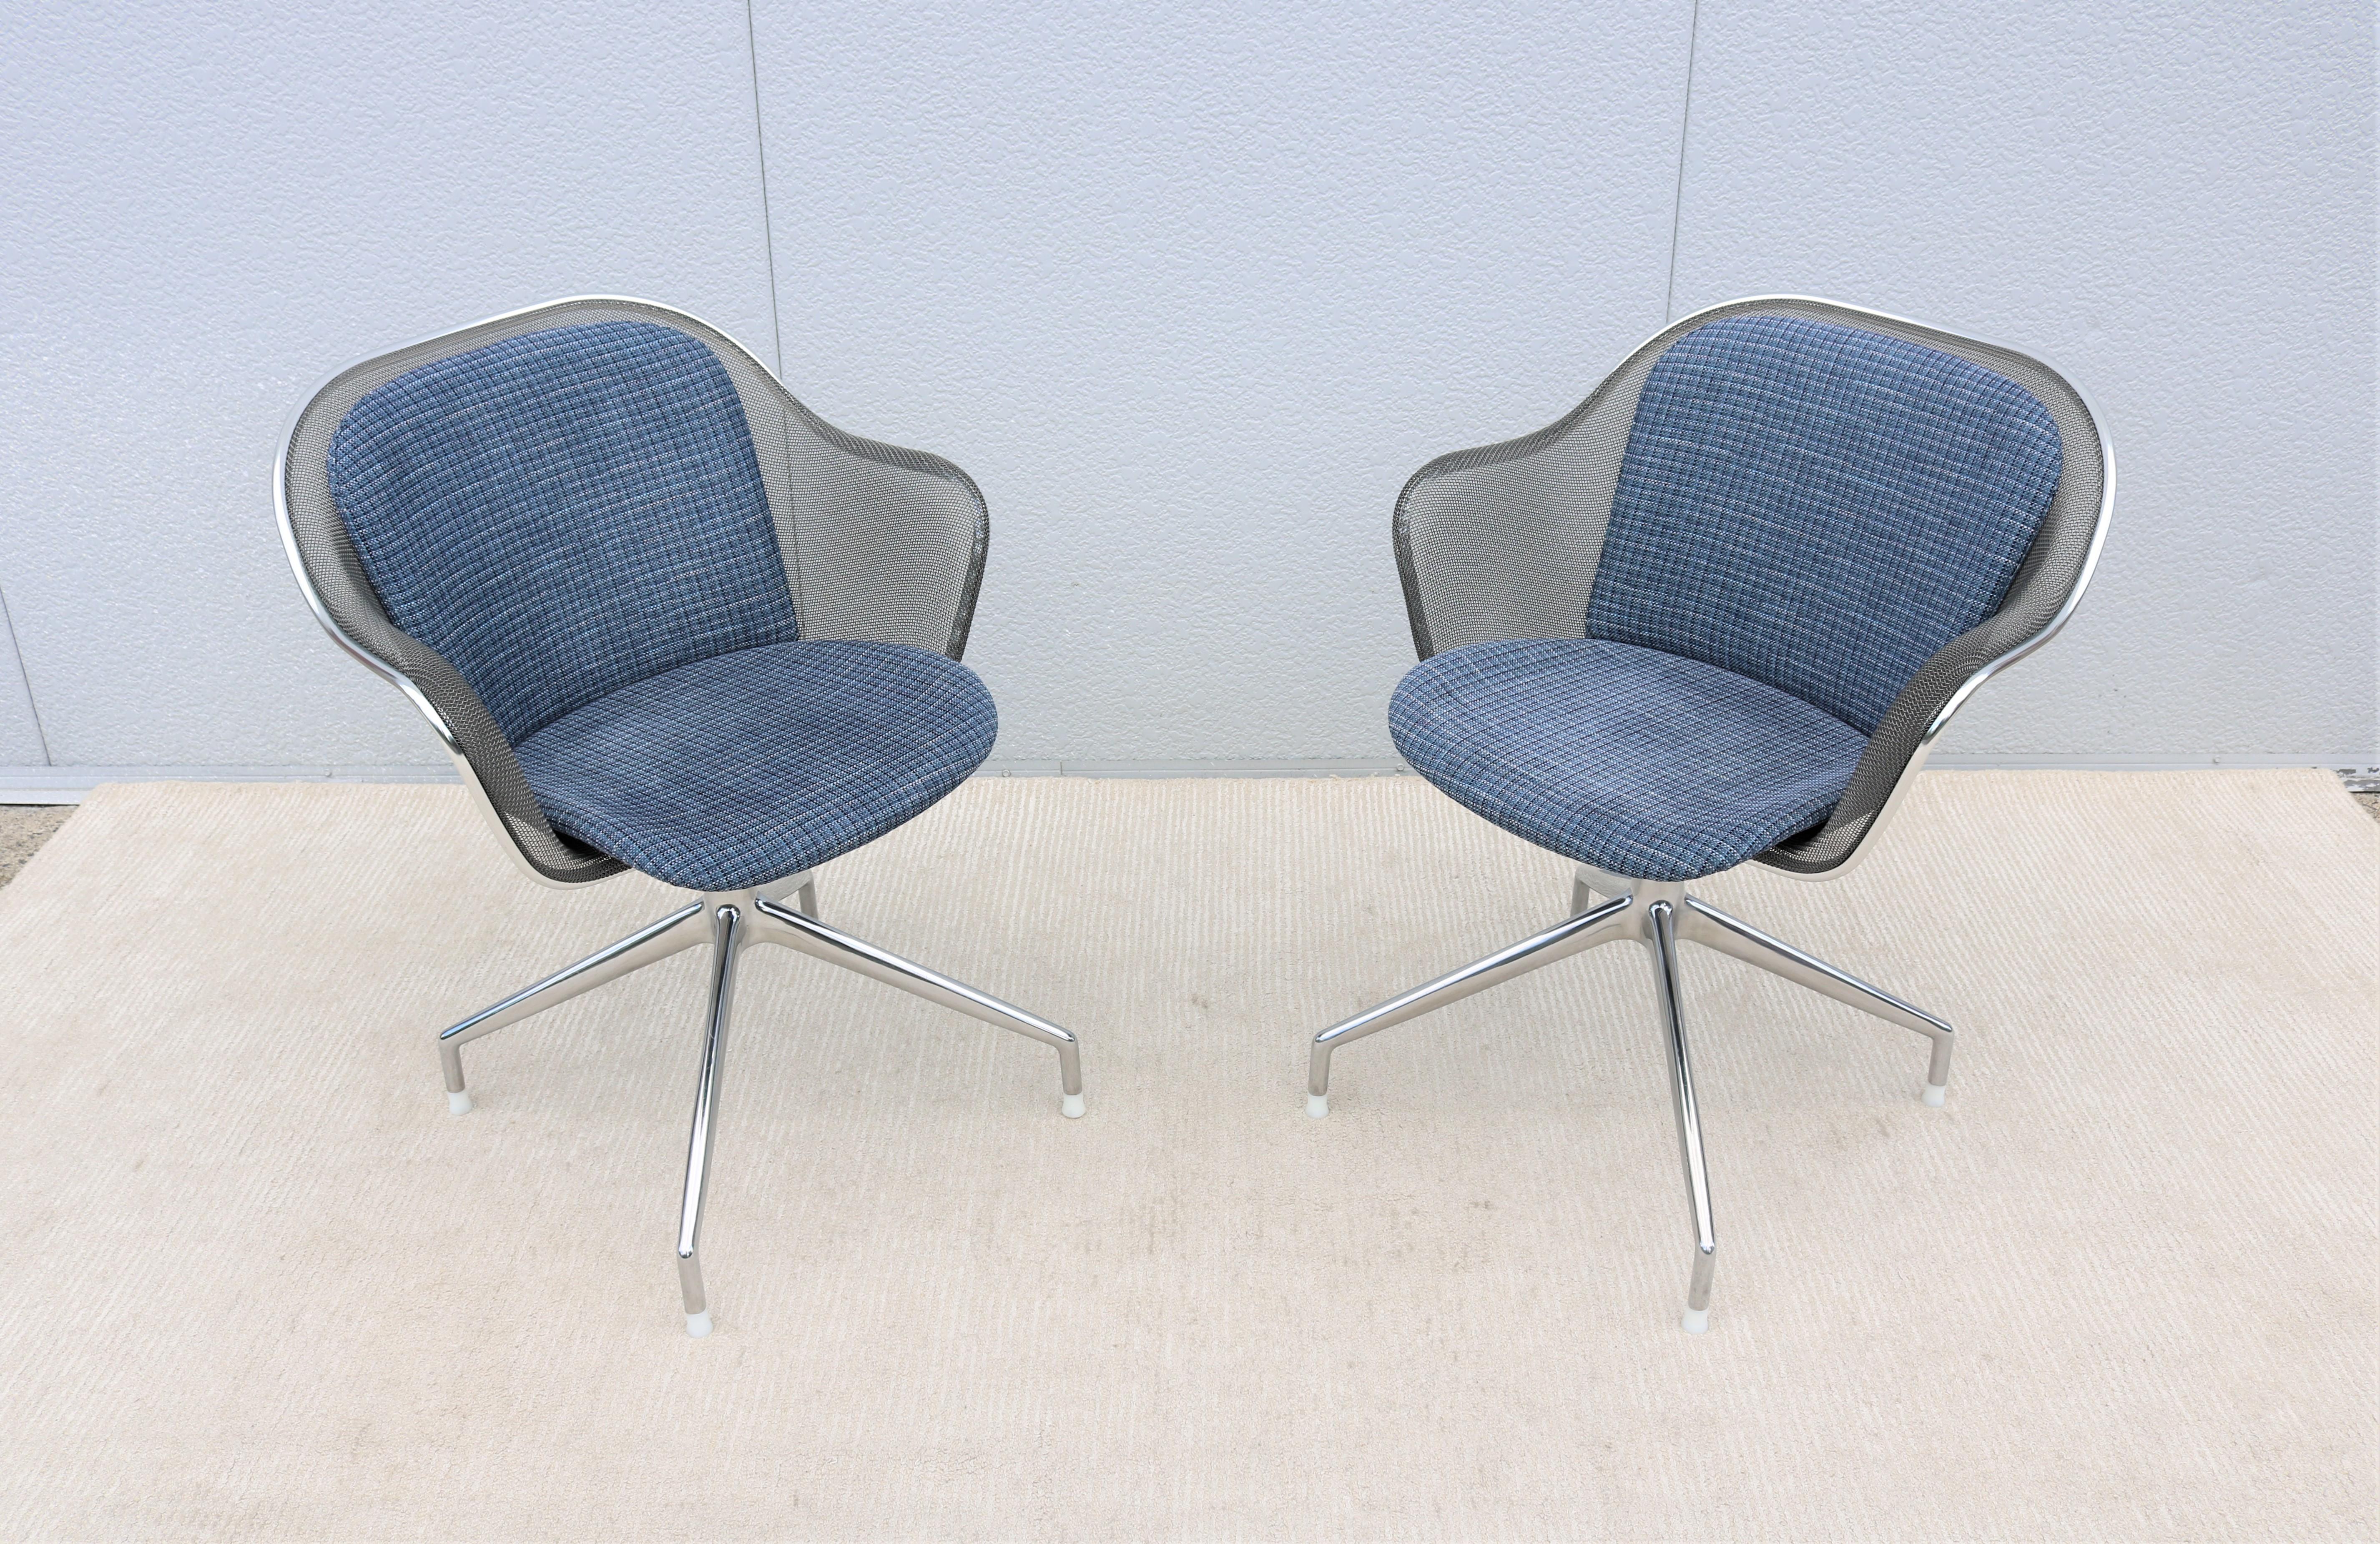 These classic and elegant Iuta swivel chairs created by Antonio Citterio for B&B Italia, combine comfort and performance and clean lines.
Featuring a stunning molded technical wire mesh shell with profiled aluminum edging.
An evolution of the